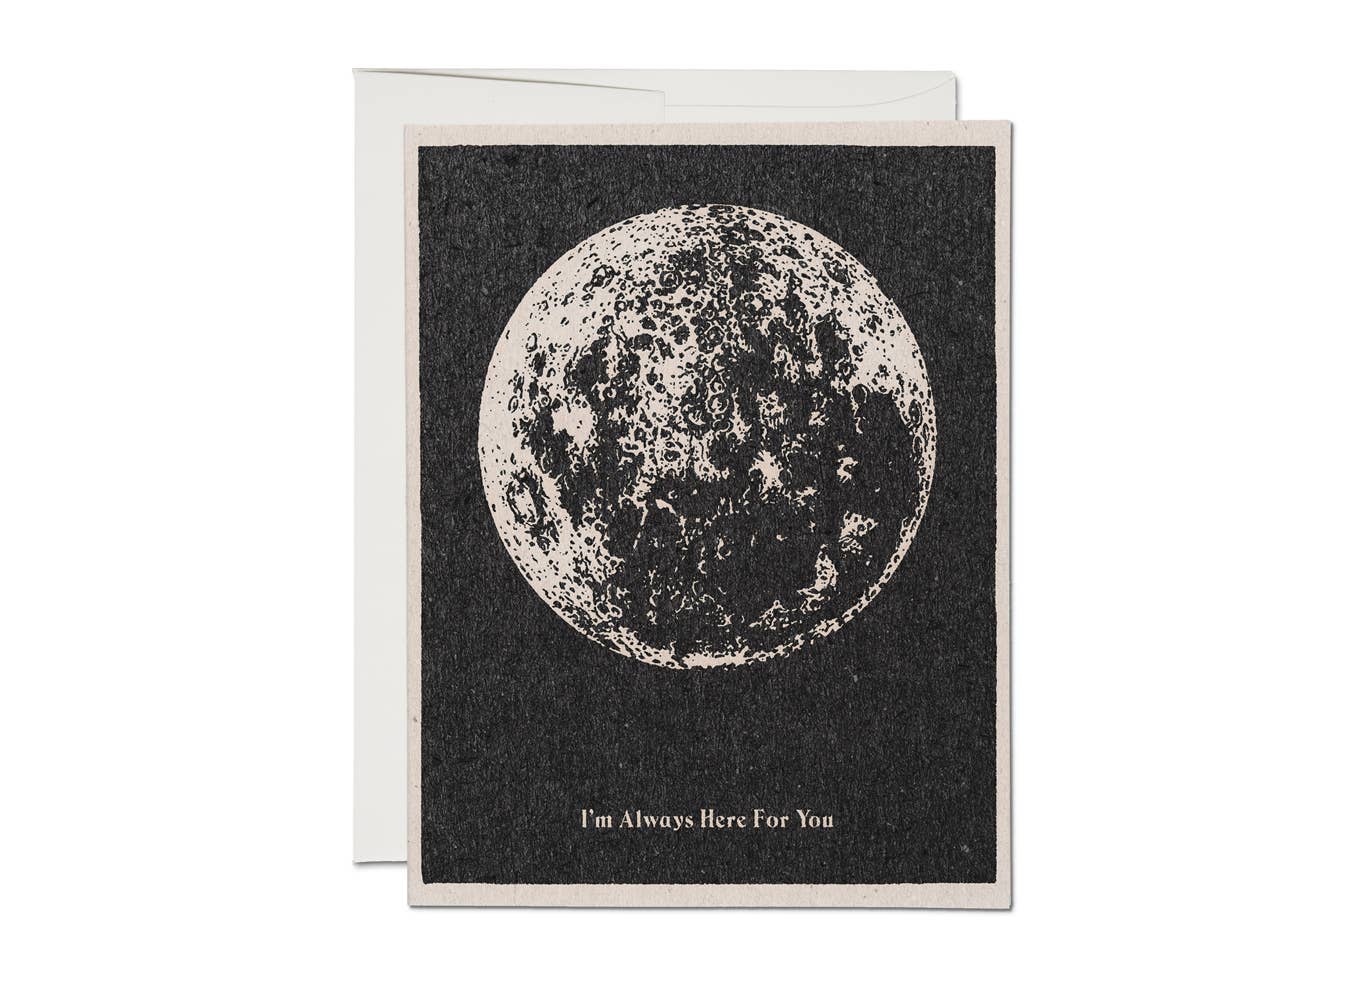 Here for You Moon sympathy greeting card: Singles